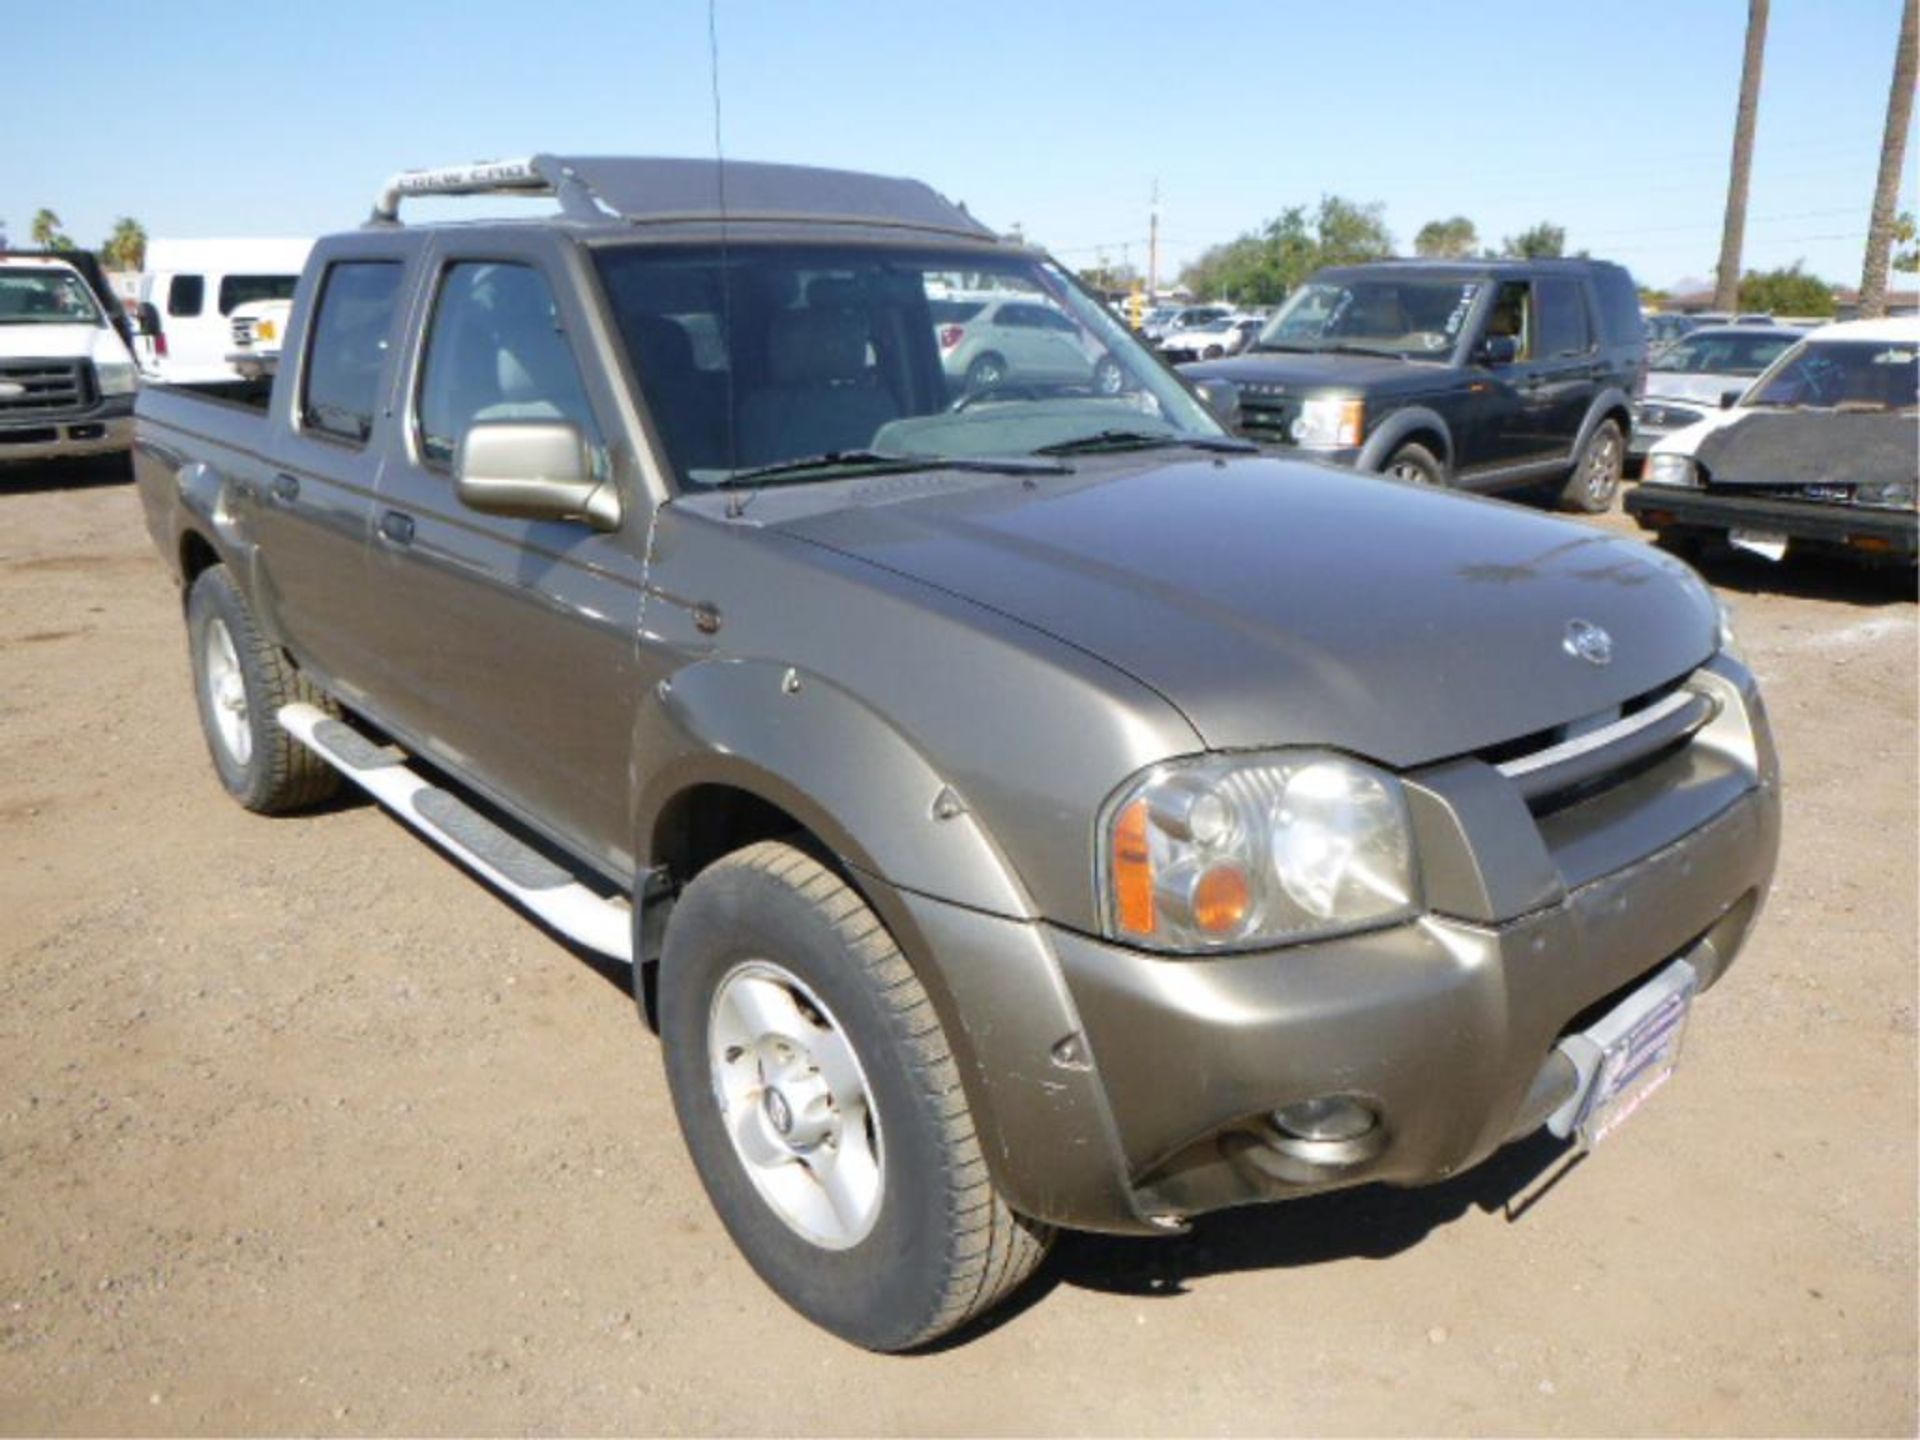 2001 Nissan Frontier - Image 3 of 13